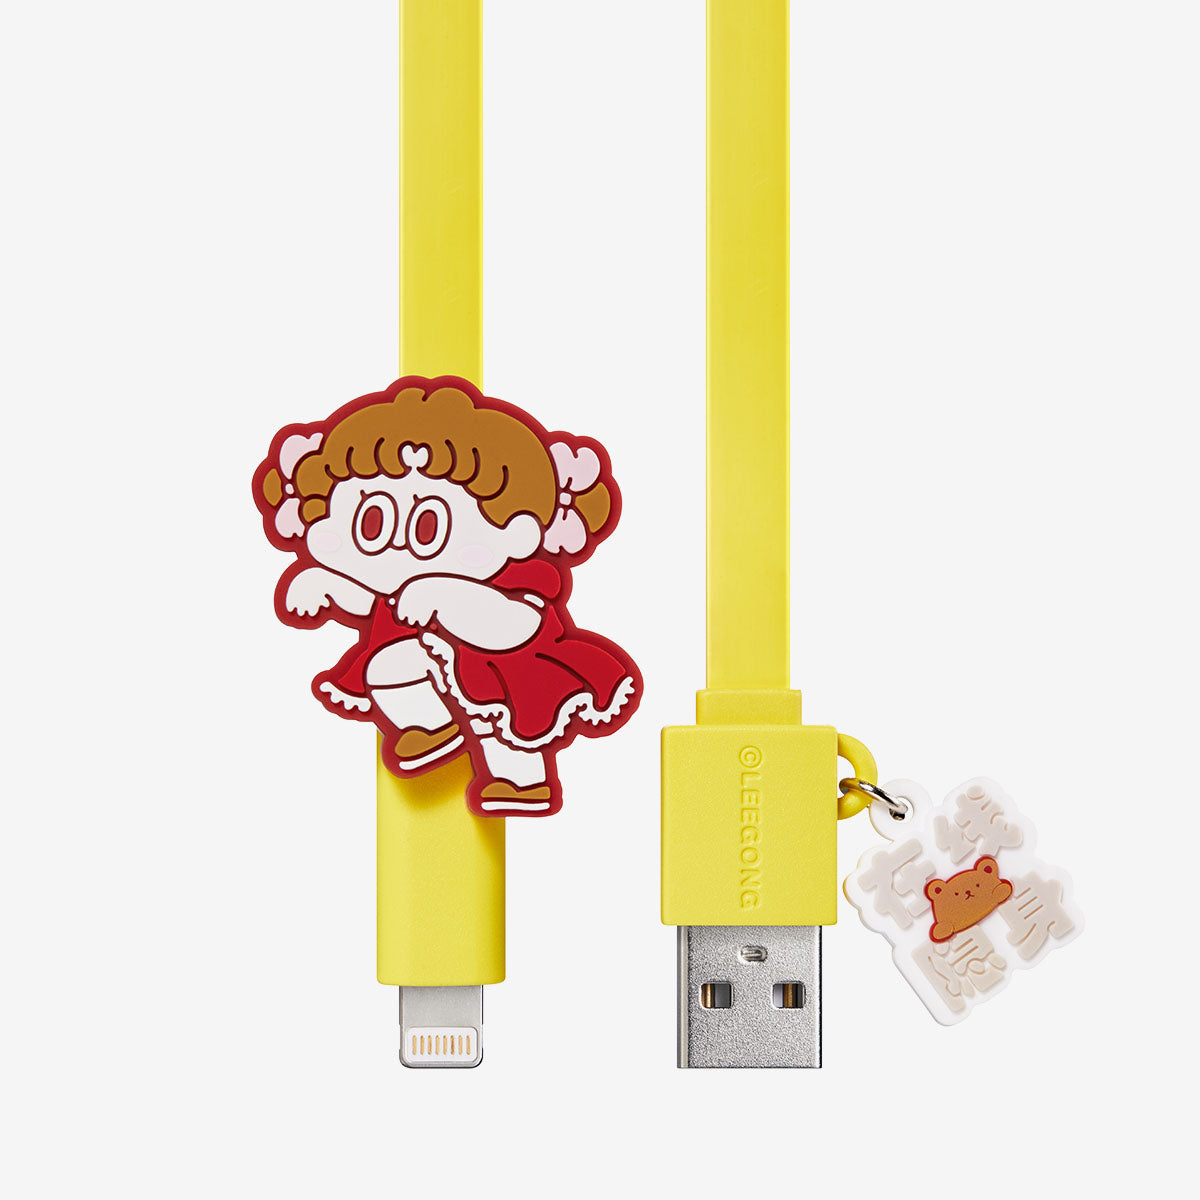 【New】Pop Mart Standard Love Dance Daily Work Series iPhone Cable Blind Box